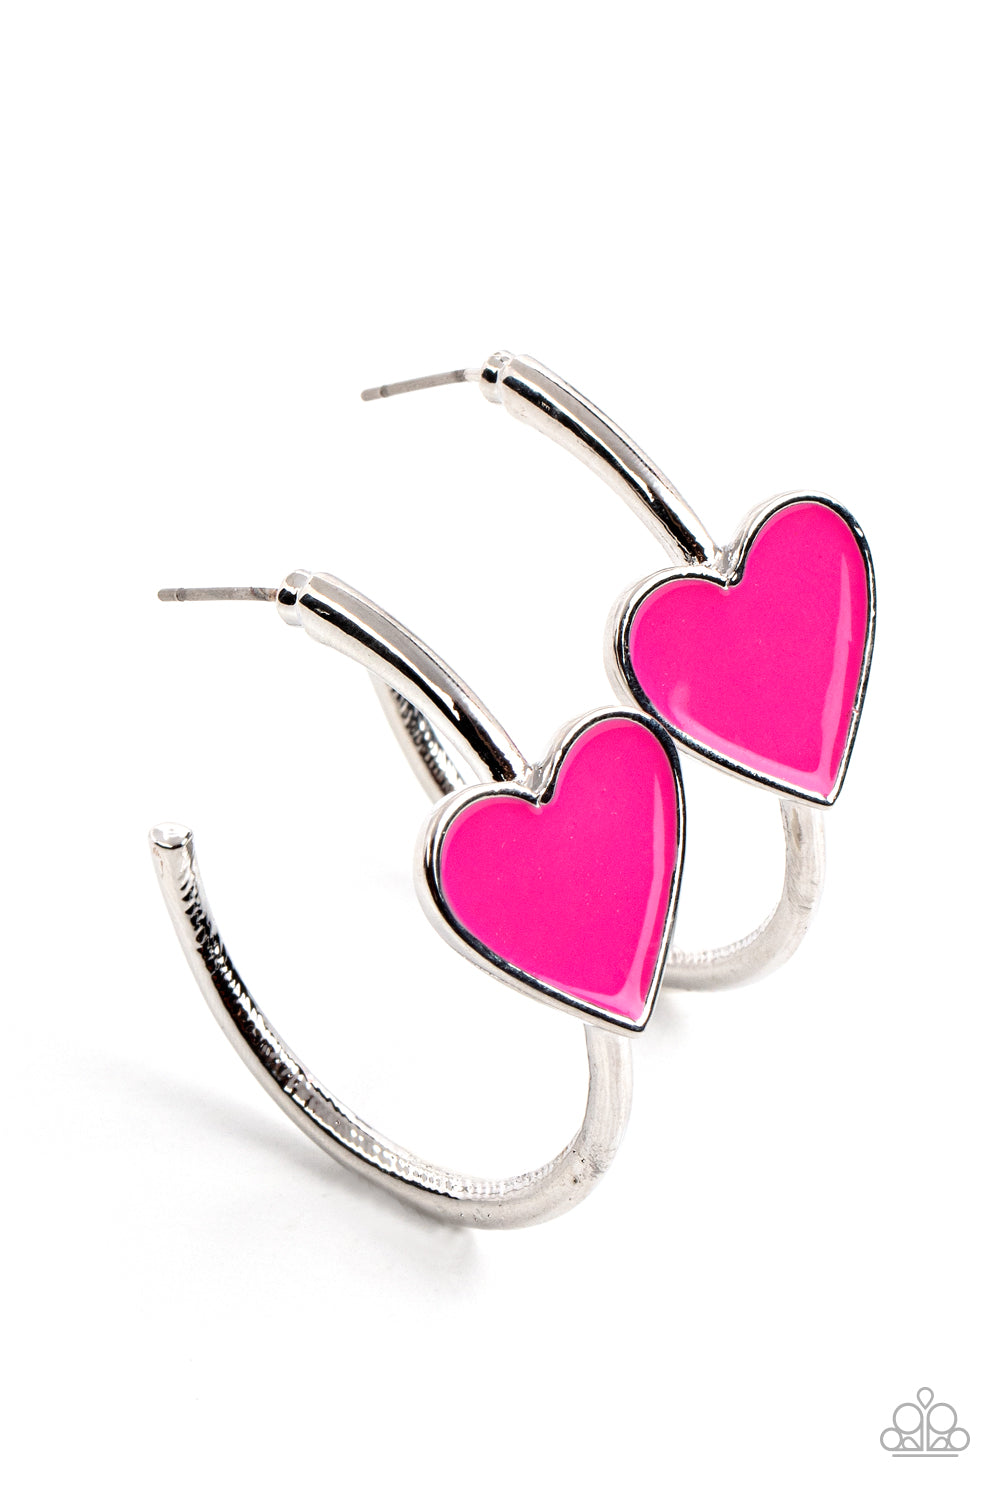 Kiss Up - Pink Heart Earrings - Paparazzi Accessories